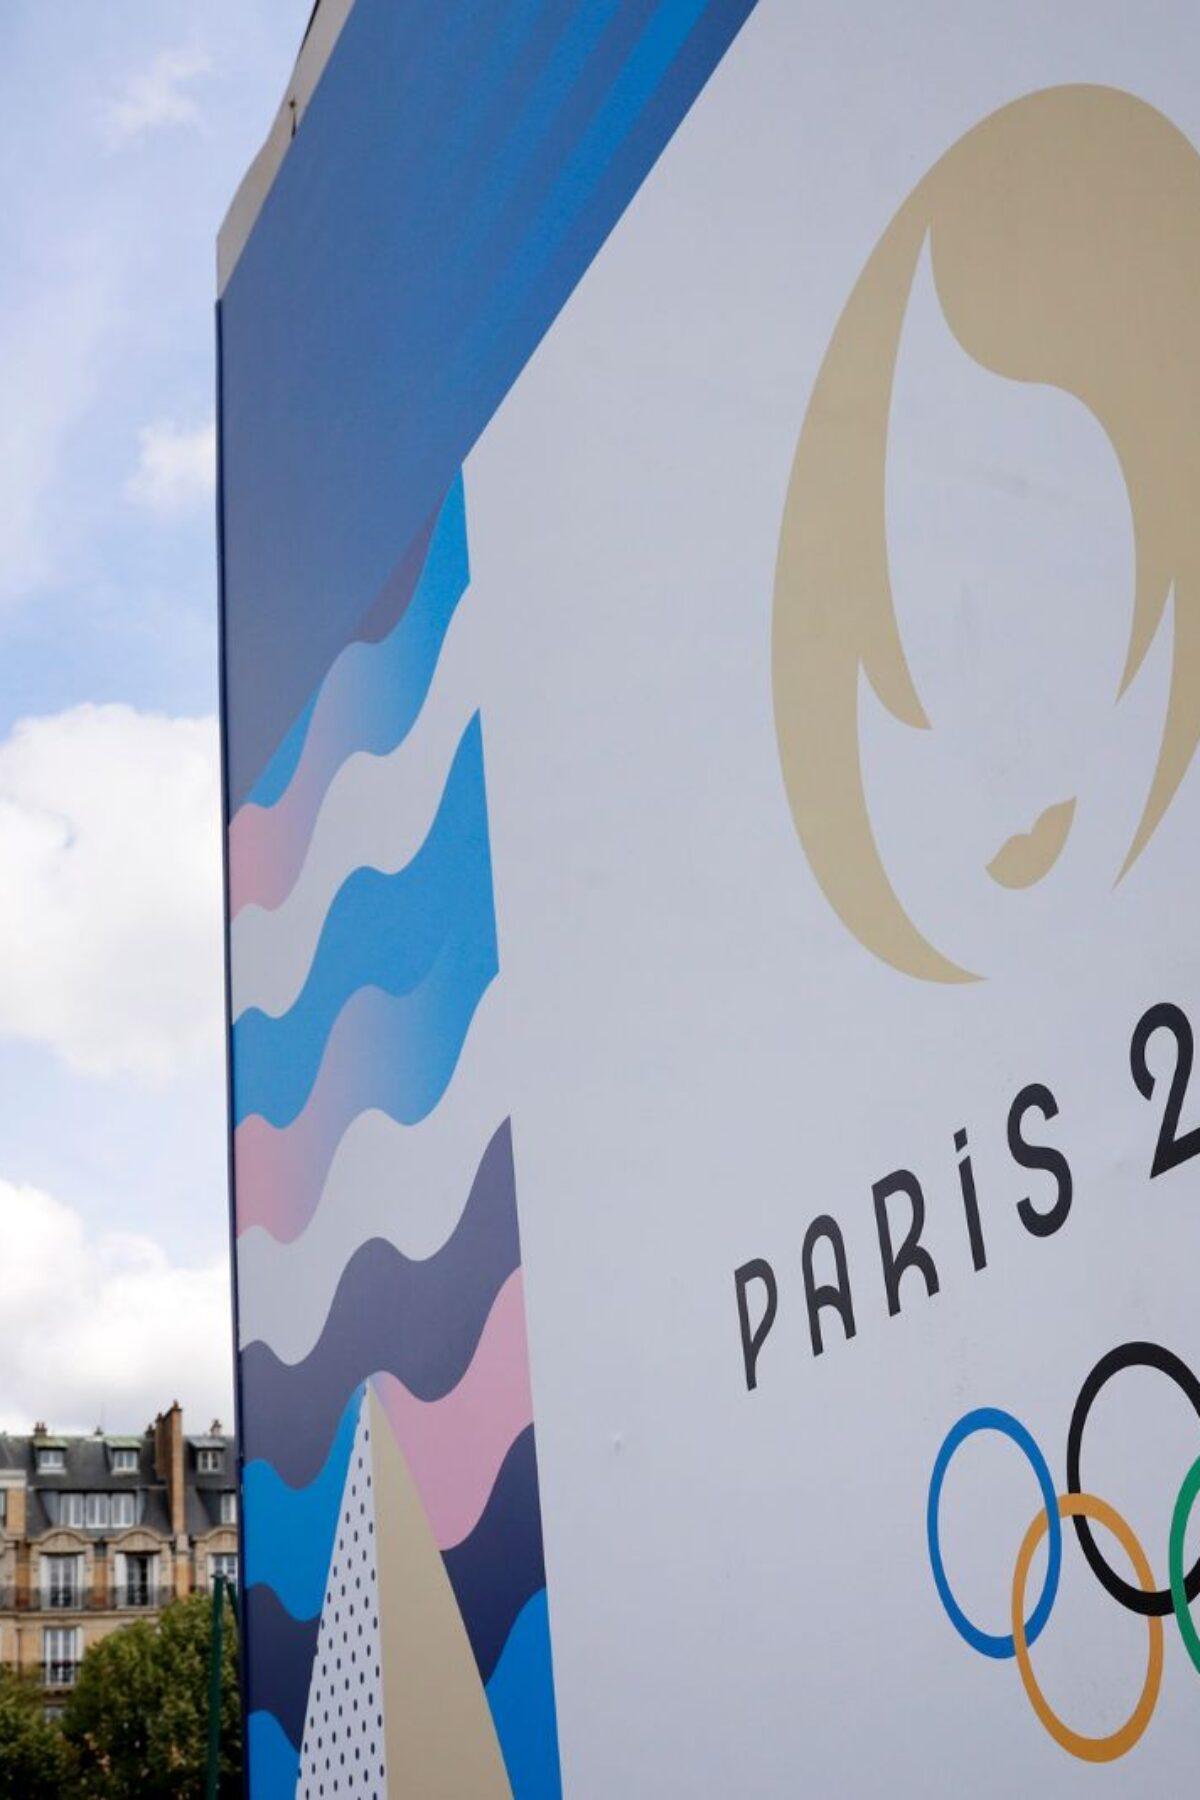 PARIS, FRANCE - JUNE 17: The Paris 2024 logo is displayed near the Eiffel Tower before the start of the Paris 2024 Olympic and Paralympic Games on June 17, 2024 in Paris, France. The city is gearing up to host the XXXIII Olympic Summer Games, from 26 July to 11 August. (Photo by Chesnot/Getty Images)